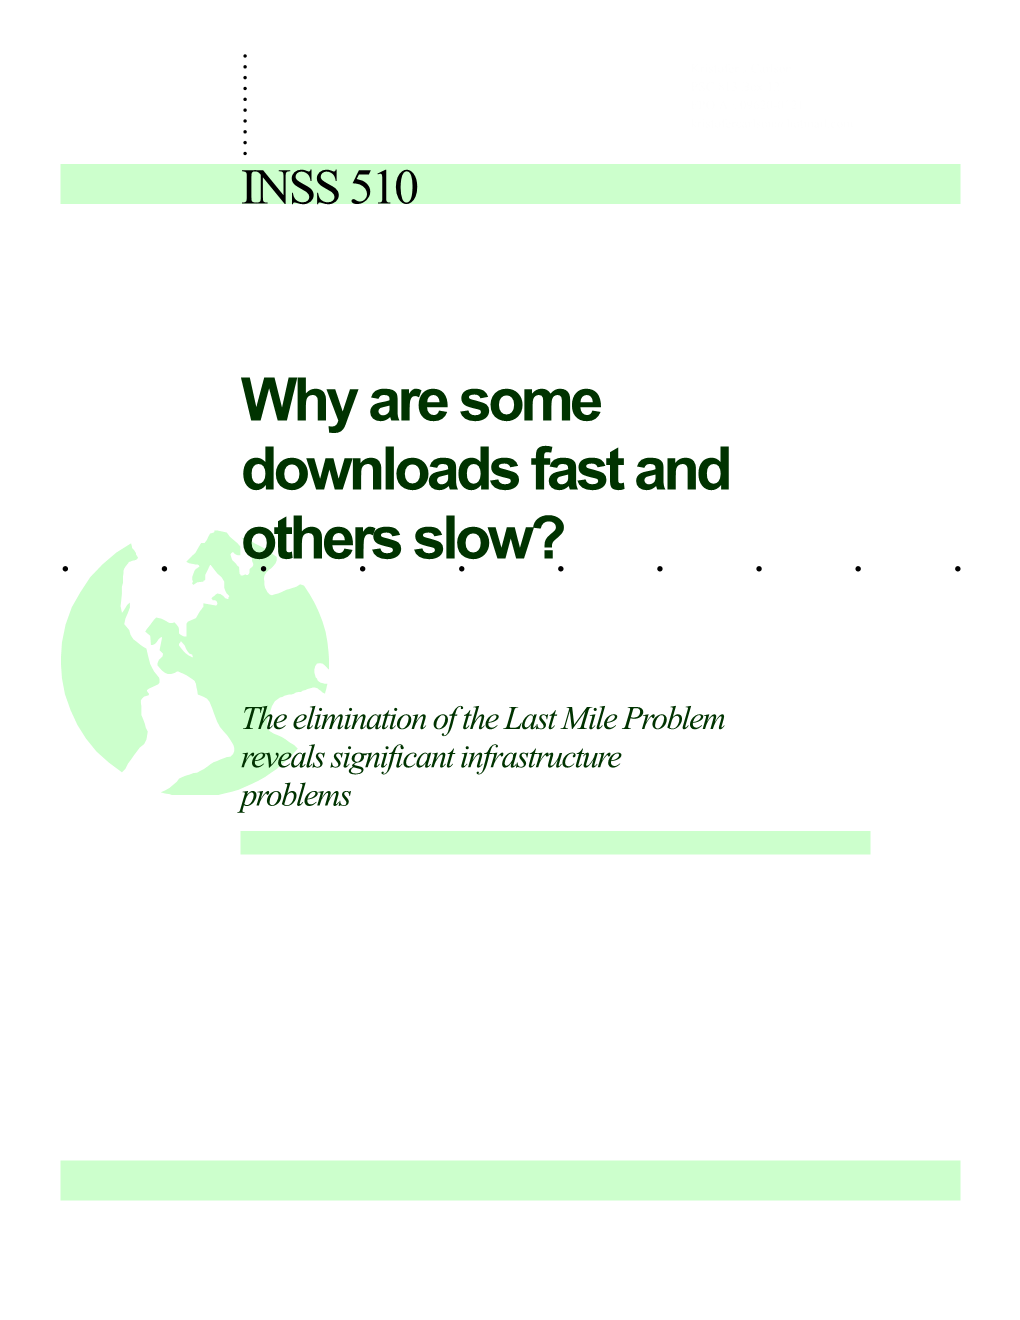 Why Are Some Downloads Fast and Others Slow?